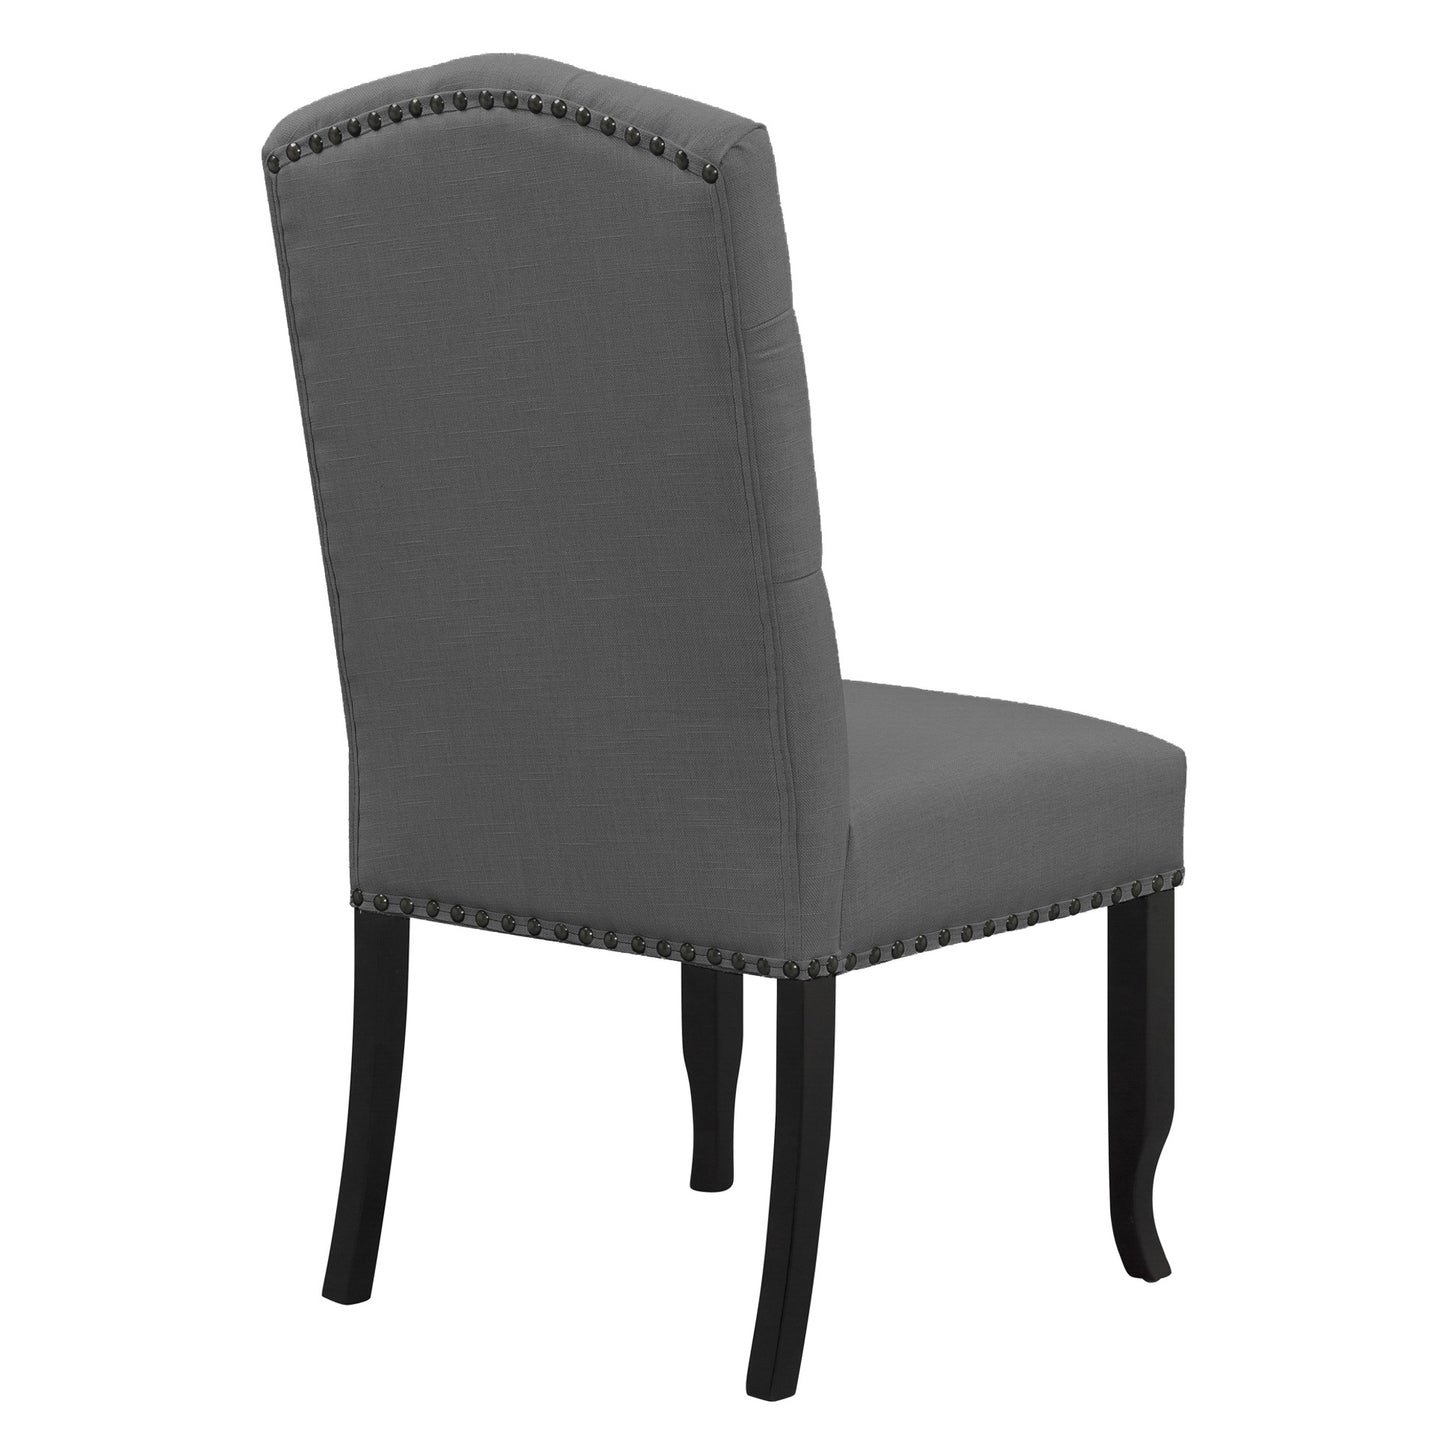 Set of 2 Aleeya Grey Fabric Dining Chair with Tufted Buttons and Nail Head Accent